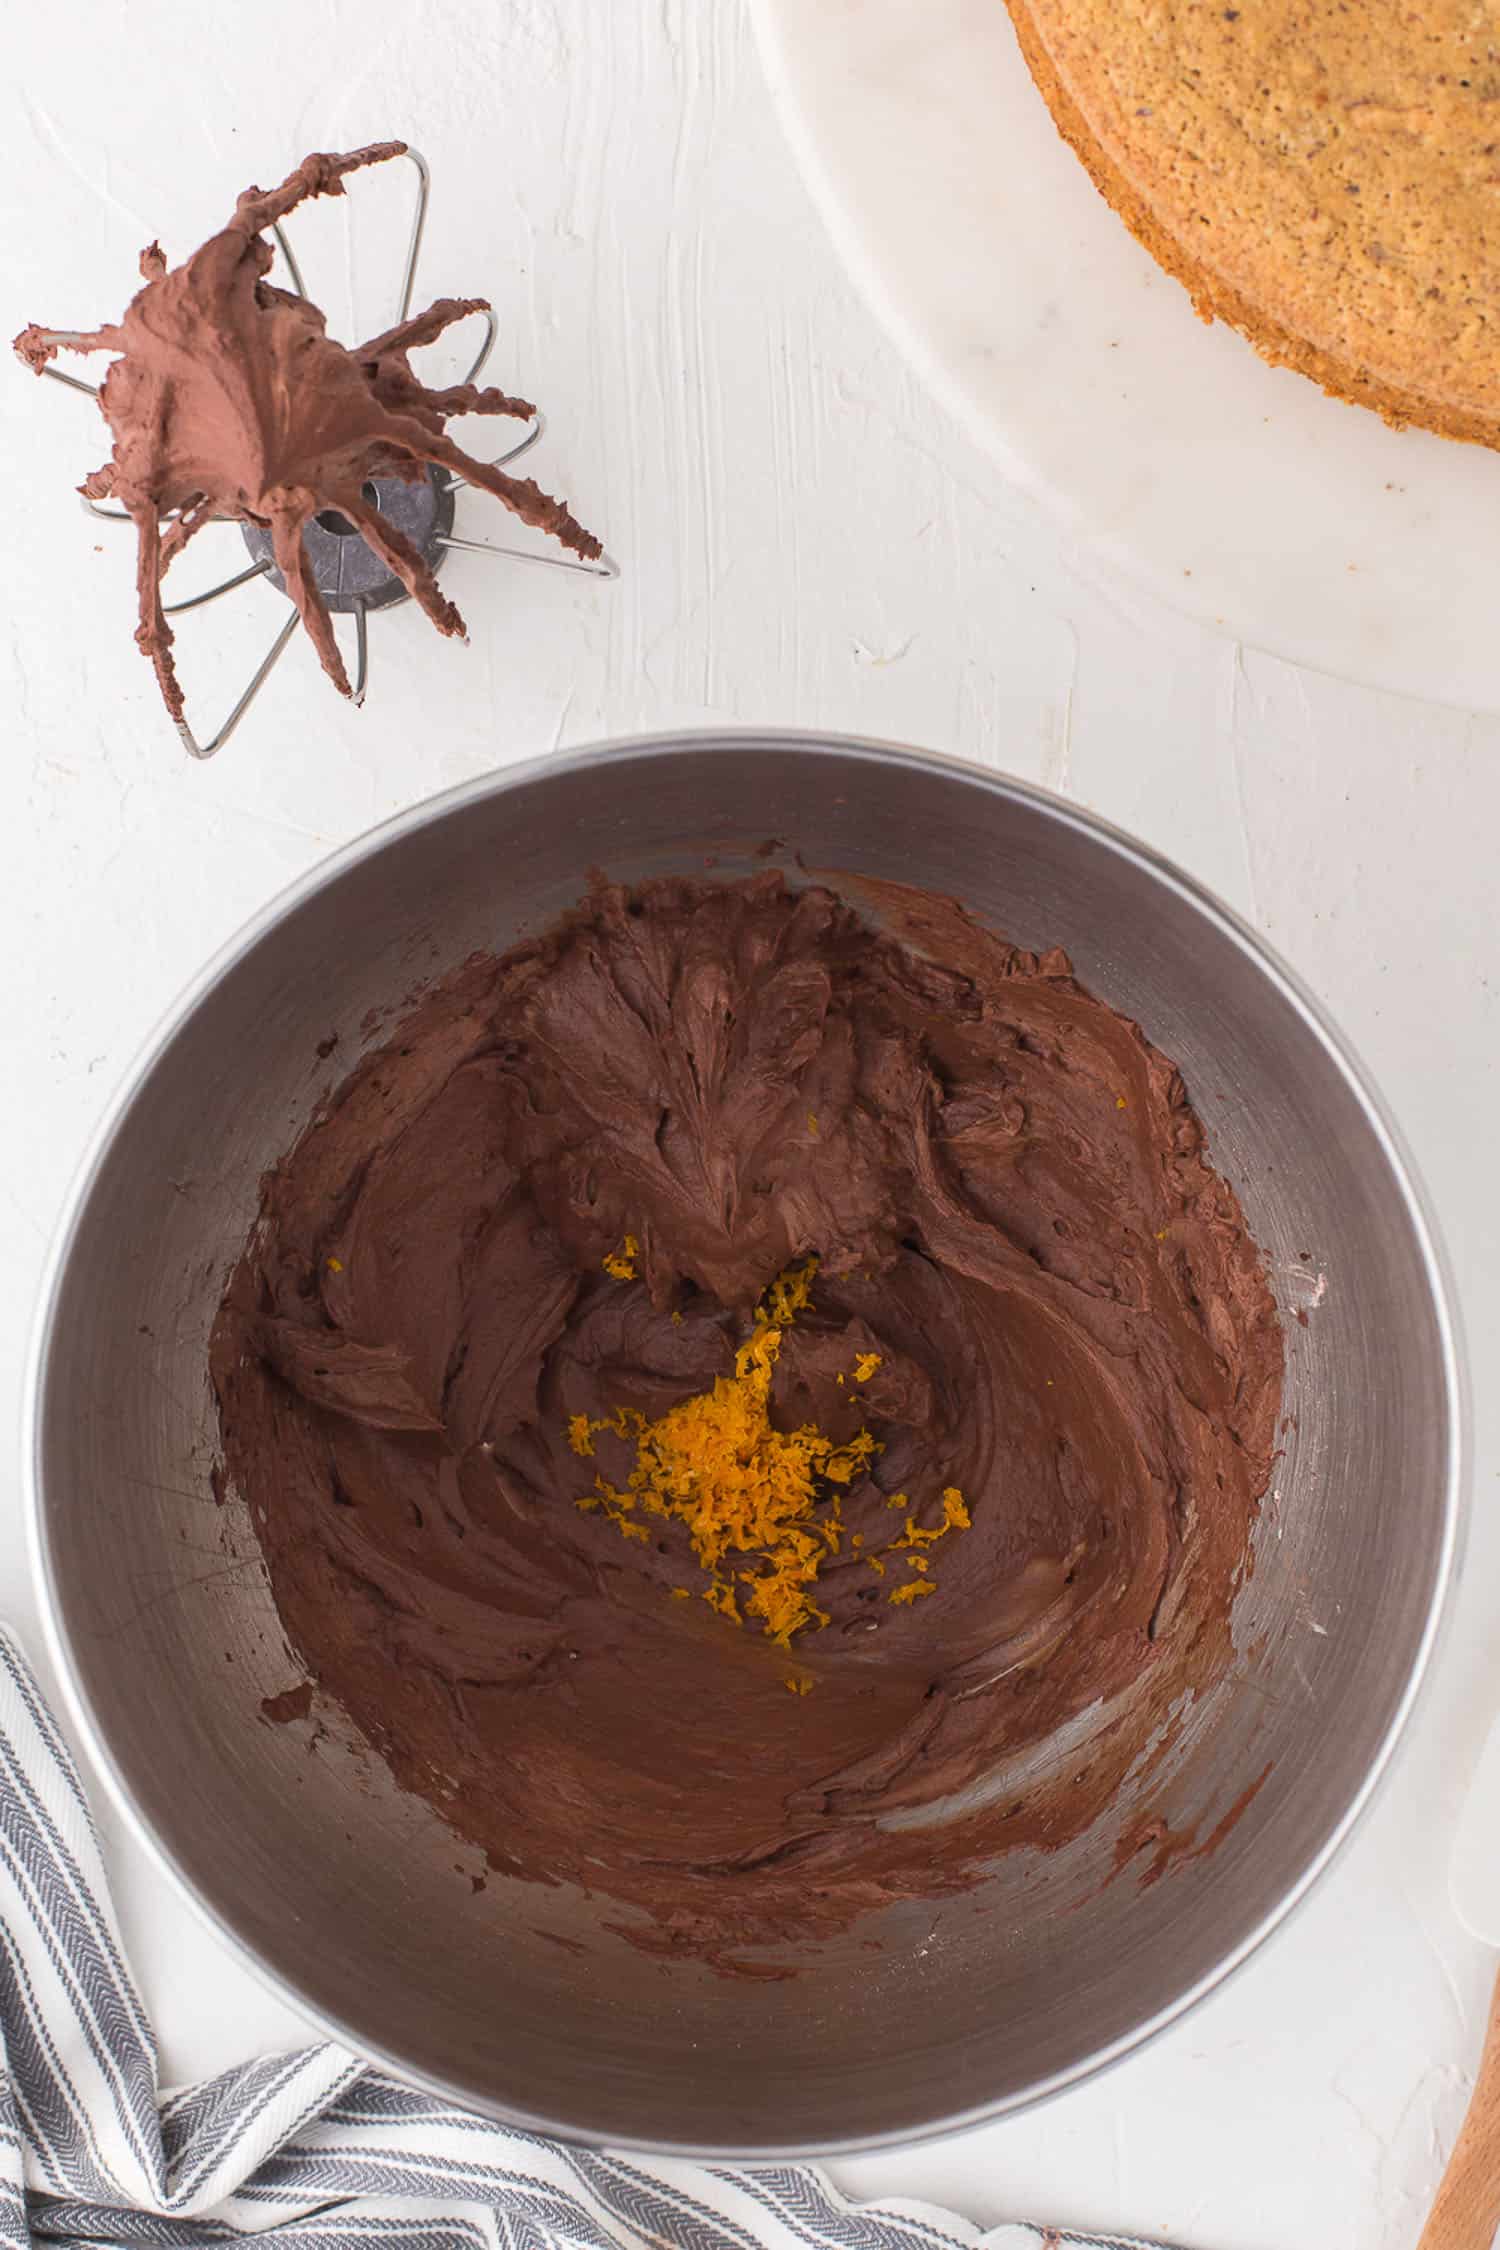 orange zest on chocolate filling in mixing bowl